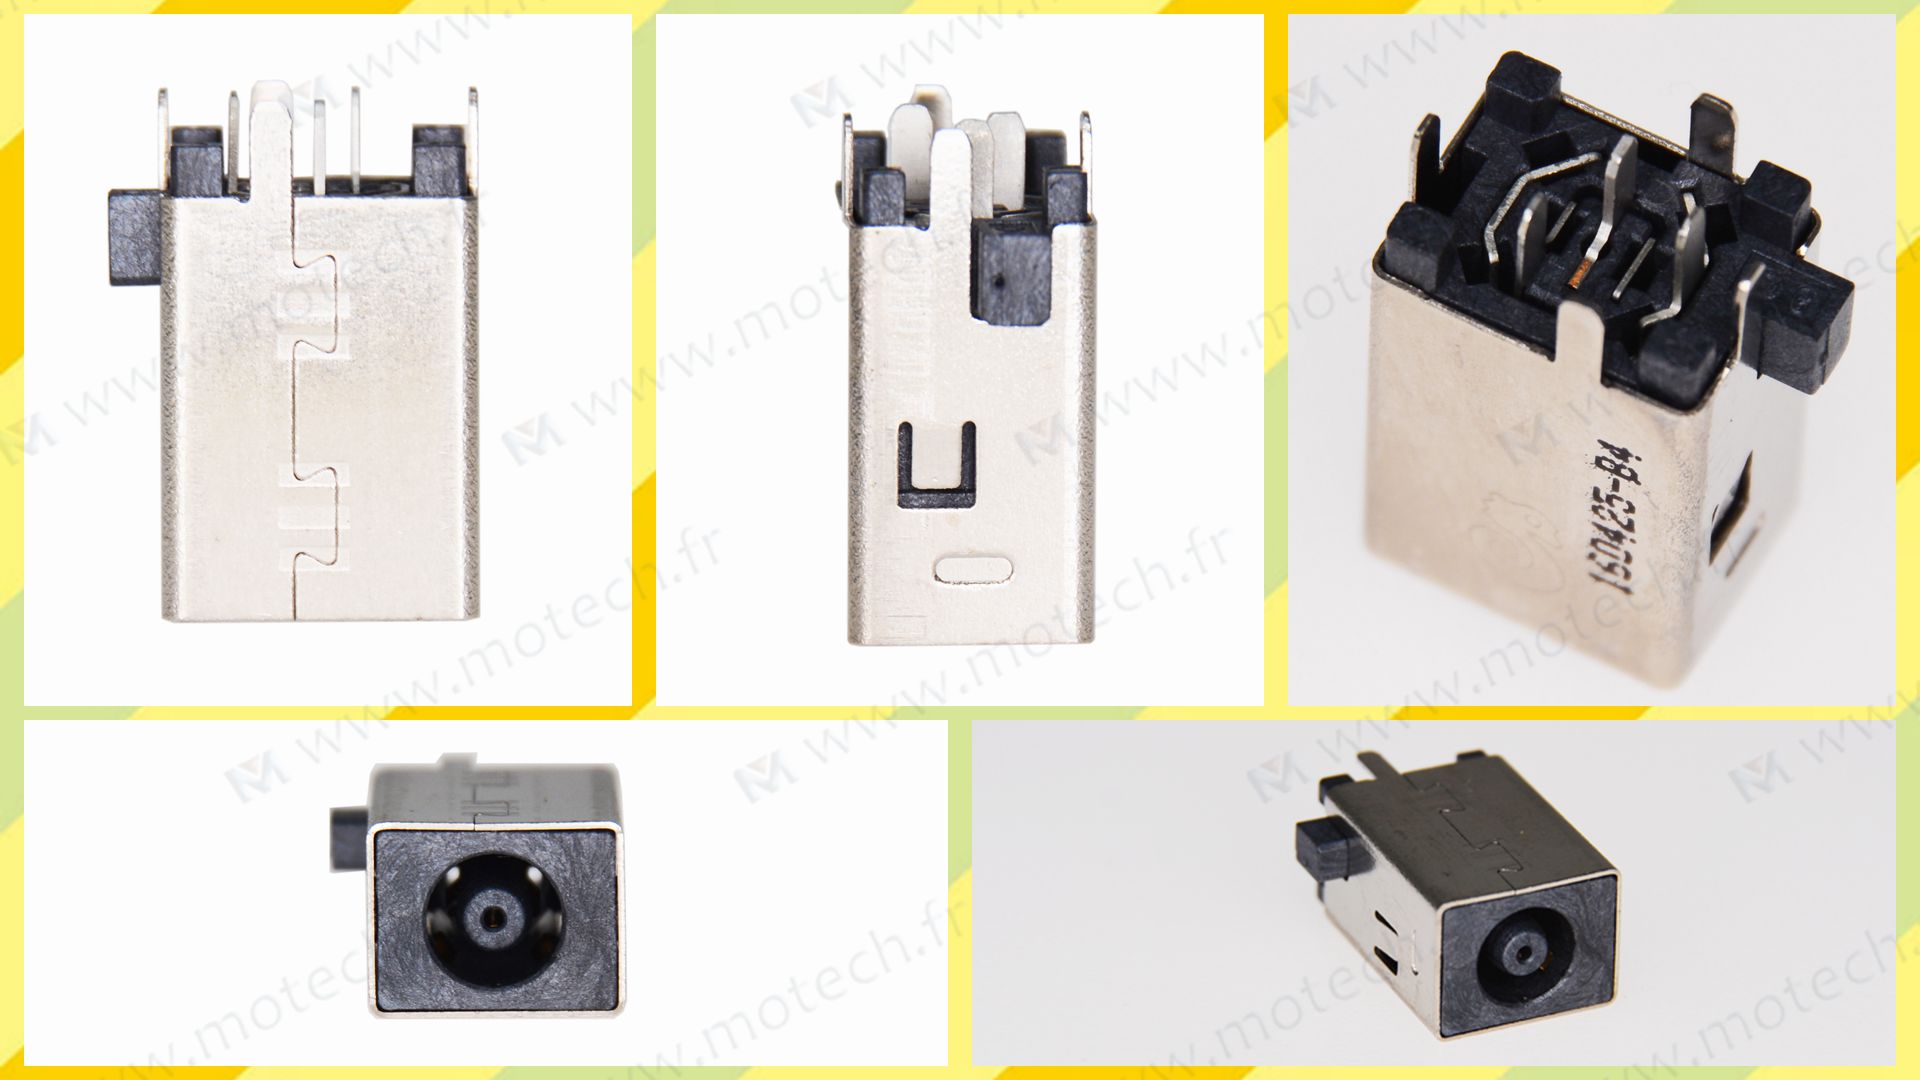 Dell 3455 AIO DC Jack, Dell 3455 AIO Jack alimentation, Dell 3455 AIO Power Jack, Dell 3455 AIO Prise Connecteur, Dell 3455 AIO Connecteur alimentation, Dell 3455 AIO connecteur de charge, 